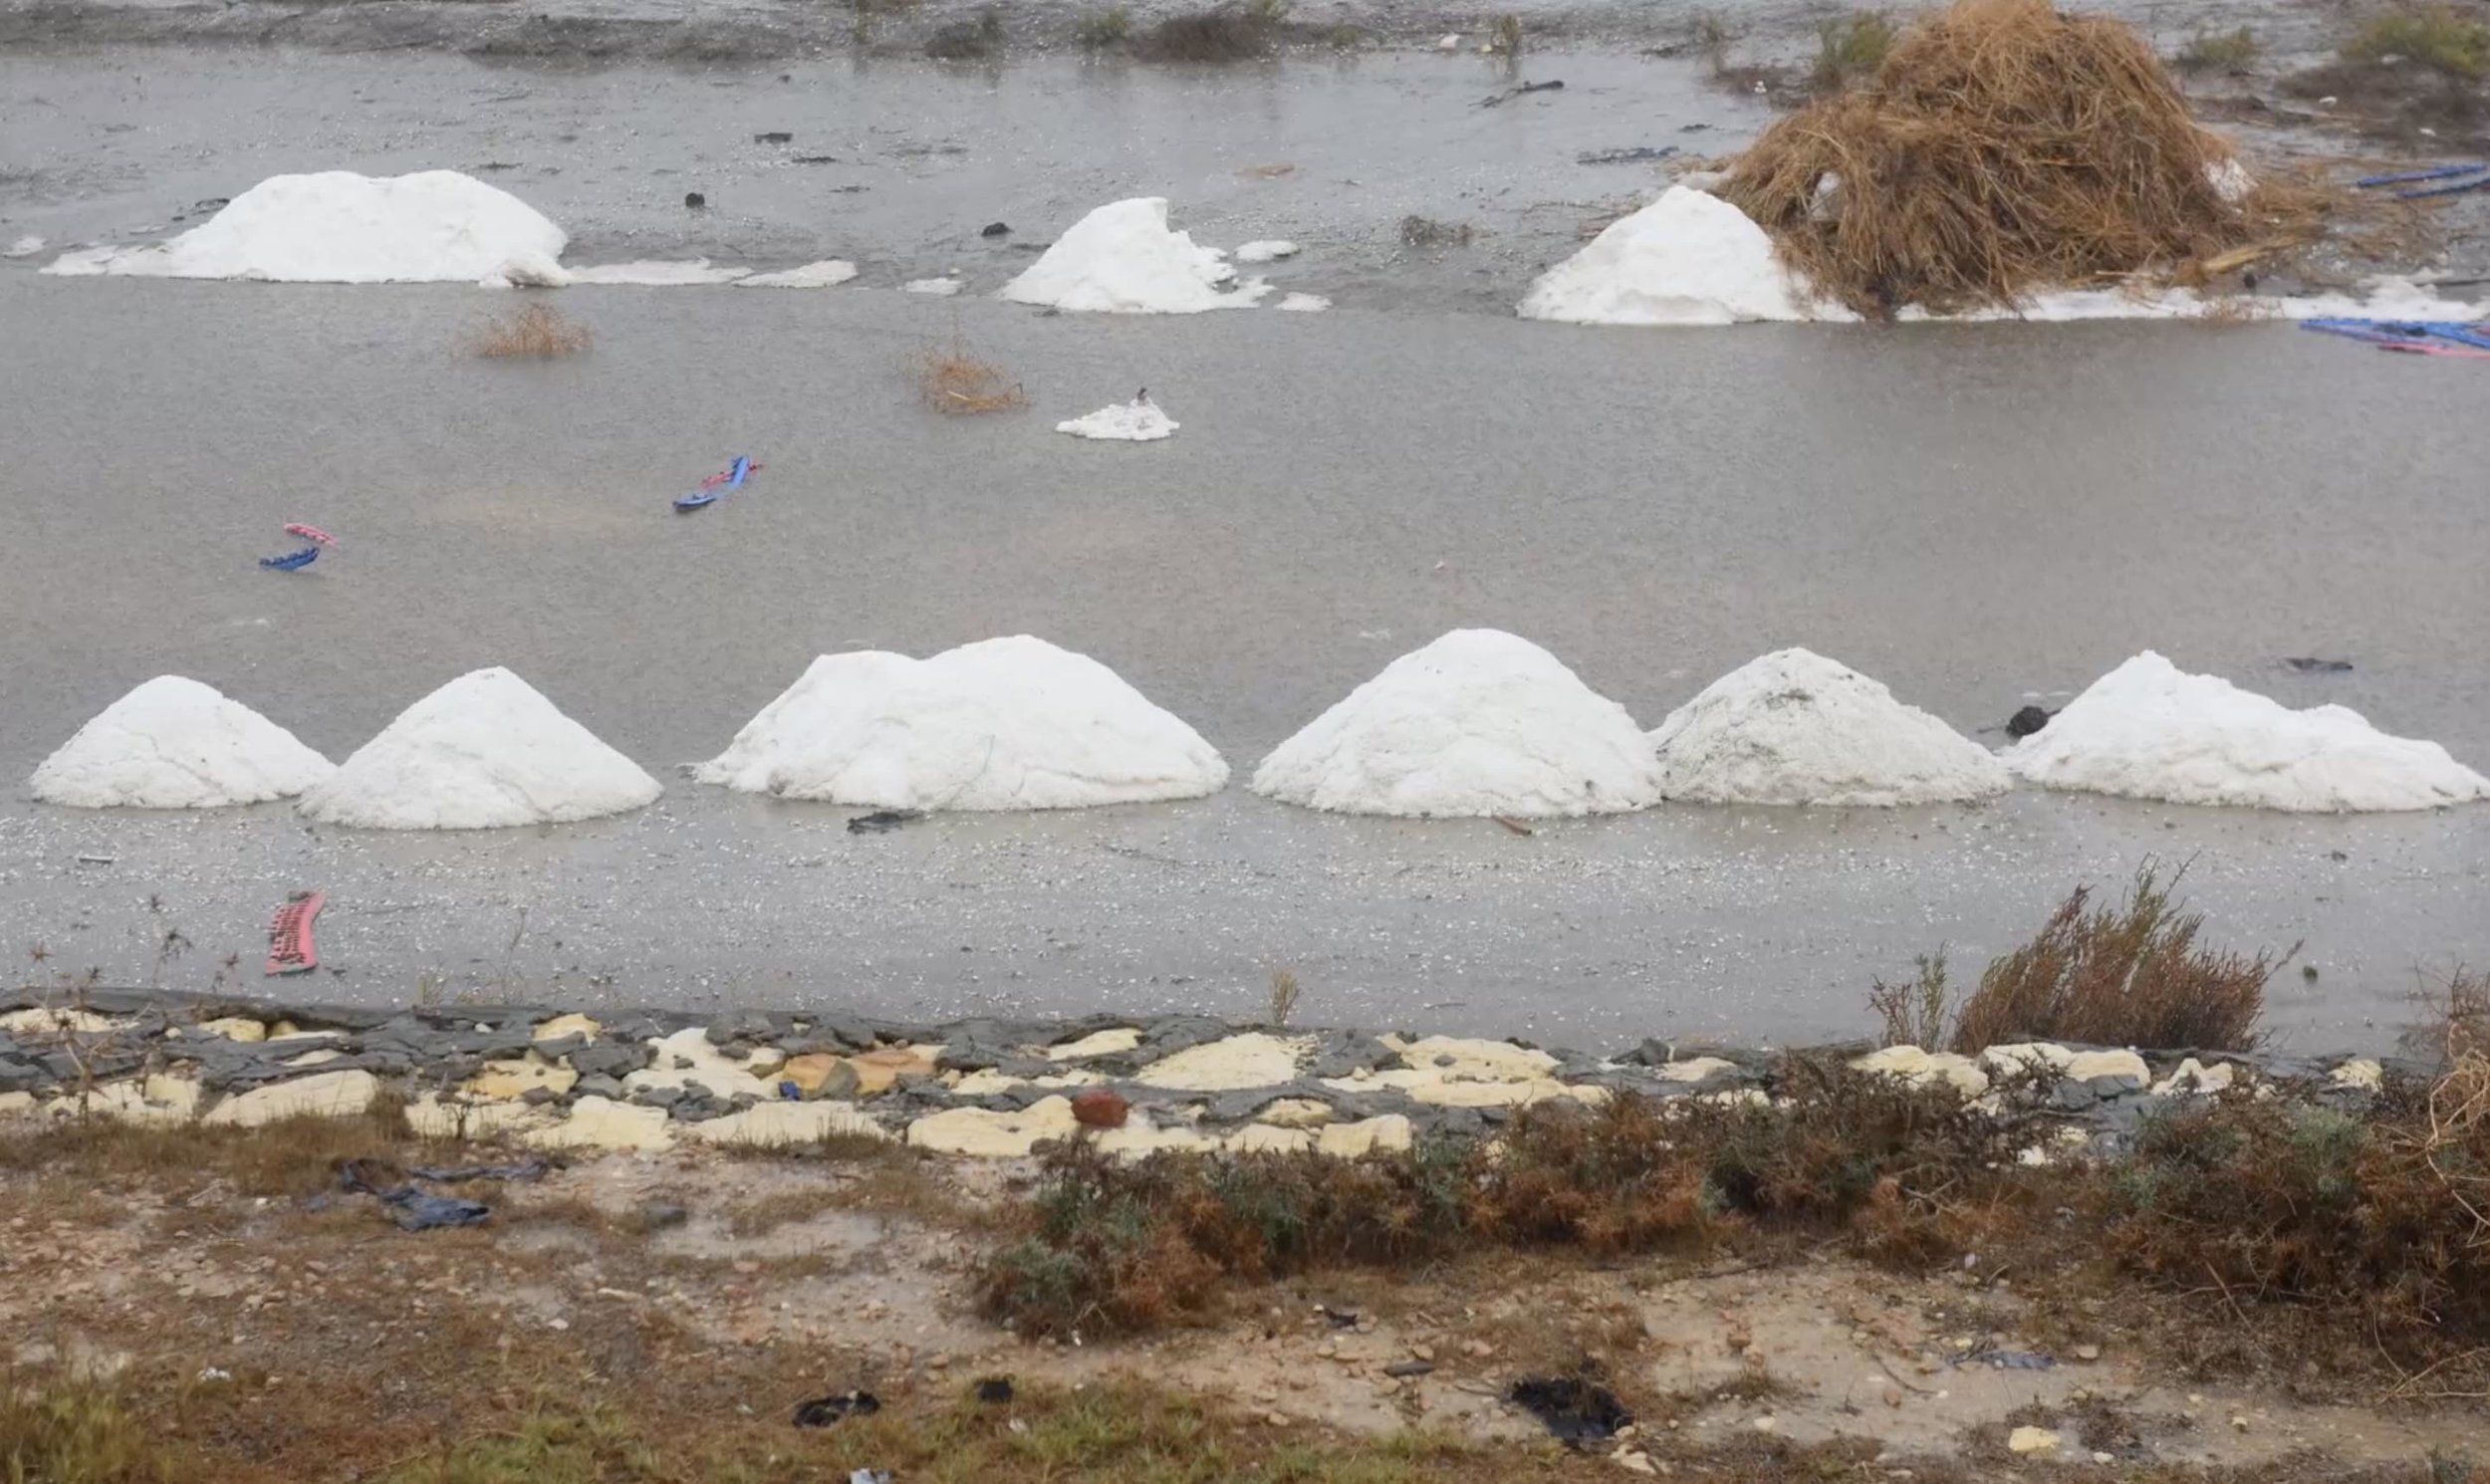   Piles of salt resulting from the evaporation of salty groundwater in the Nile Delta areas  